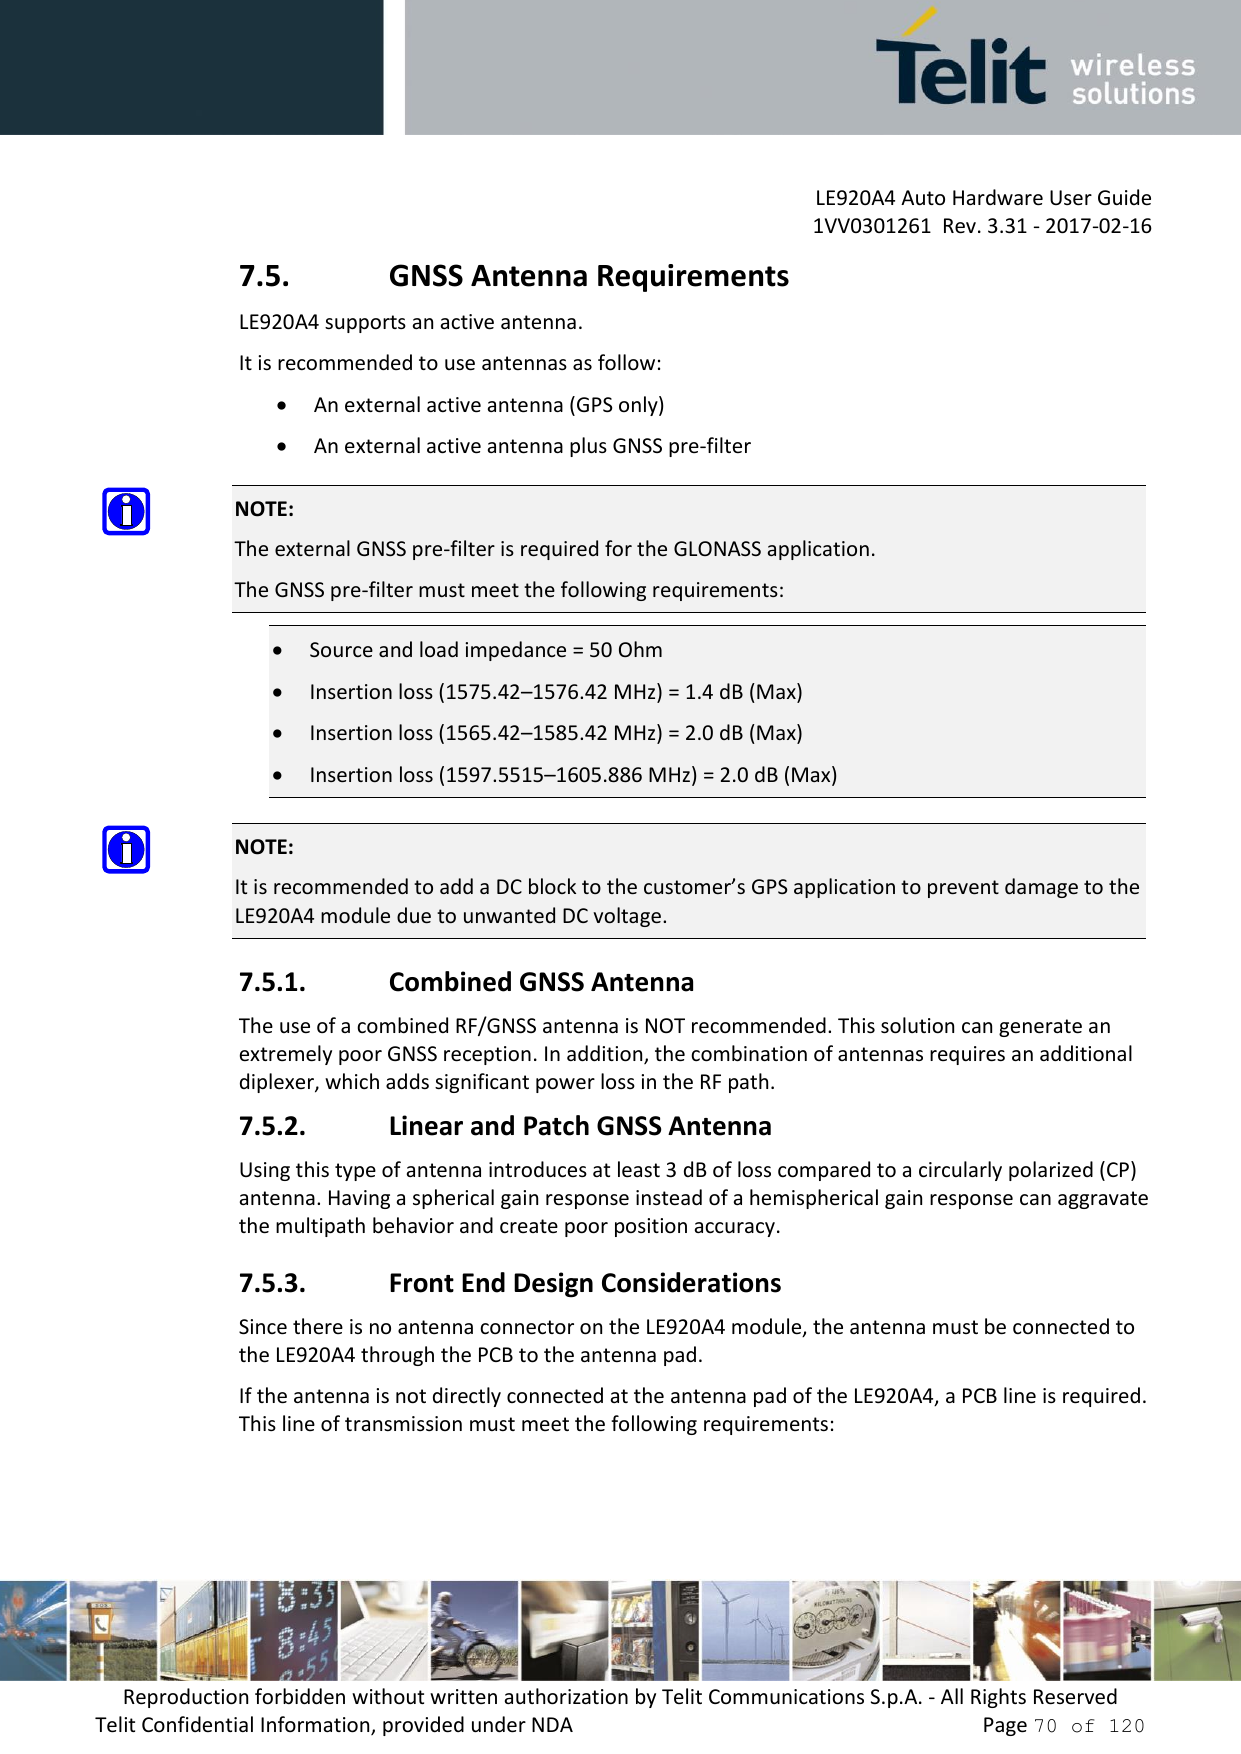         LE920A4 Auto Hardware User Guide     1VV0301261  Rev. 3.31 - 2017-02-16 Reproduction forbidden without written authorization by Telit Communications S.p.A. - All Rights Reserved Telit Confidential Information, provided under NDA                 Page 70 of 120 7.5. GNSS Antenna Requirements LE920A4 supports an active antenna. It is recommended to use antennas as follow:  An external active antenna (GPS only)  An external active antenna plus GNSS pre-filter  NOTE: The external GNSS pre-filter is required for the GLONASS application. The GNSS pre-filter must meet the following requirements:  Source and load impedance = 50 Ohm  Insertion loss (1575.42–1576.42 MHz) = 1.4 dB (Max)  Insertion loss (1565.42–1585.42 MHz) = 2.0 dB (Max)  Insertion loss (1597.5515–1605.886 MHz) = 2.0 dB (Max)  NOTE: It is recommended to add a DC block to the customer’s GPS application to prevent damage to the LE920A4 module due to unwanted DC voltage. 7.5.1. Combined GNSS Antenna The use of a combined RF/GNSS antenna is NOT recommended. This solution can generate an extremely poor GNSS reception. In addition, the combination of antennas requires an additional diplexer, which adds significant power loss in the RF path. 7.5.2. Linear and Patch GNSS Antenna Using this type of antenna introduces at least 3 dB of loss compared to a circularly polarized (CP) antenna. Having a spherical gain response instead of a hemispherical gain response can aggravate the multipath behavior and create poor position accuracy. 7.5.3. Front End Design Considerations Since there is no antenna connector on the LE920A4 module, the antenna must be connected to the LE920A4 through the PCB to the antenna pad.  If the antenna is not directly connected at the antenna pad of the LE920A4, a PCB line is required. This line of transmission must meet the following requirements: 